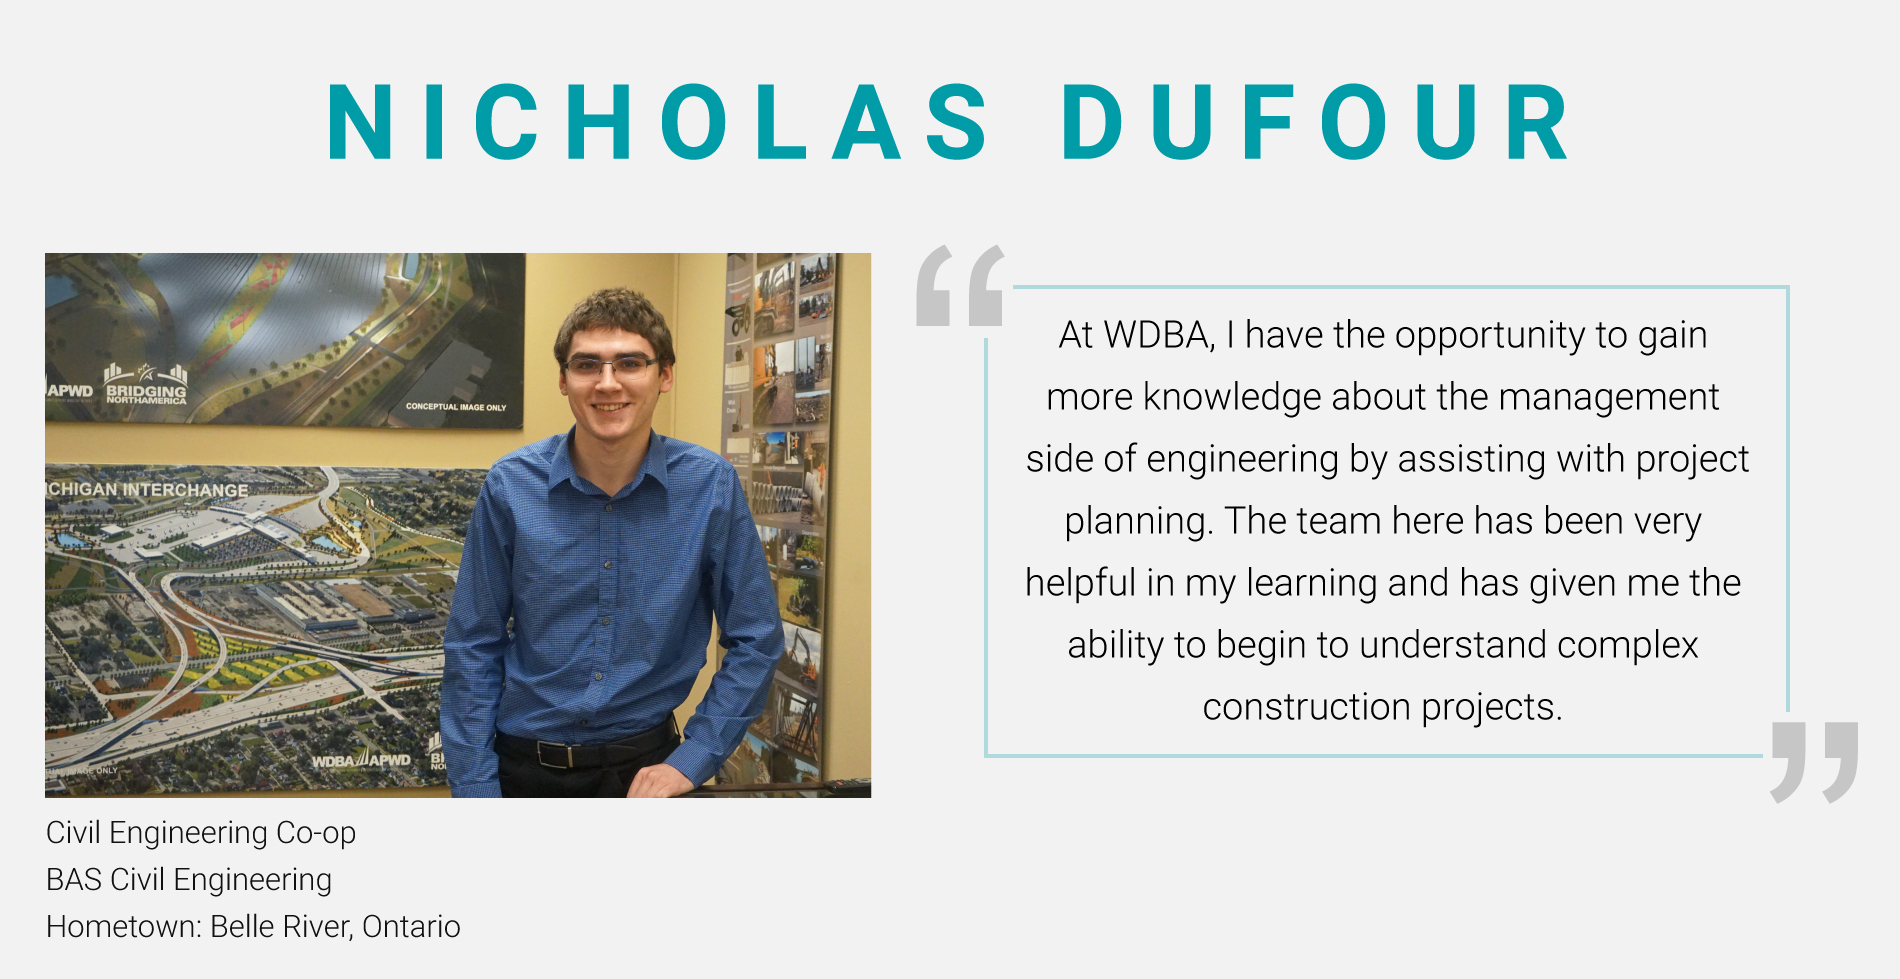 Nicholas Dufour, Civil Engineering Co-op. BAS Civil Engineering. "At WDBA, I have the opportunity to gain more knowledge about the management side of engineering by assisting with project planning. The team here has been very helpful in my learning and has given me the ability to begin to understand complex construction projects."